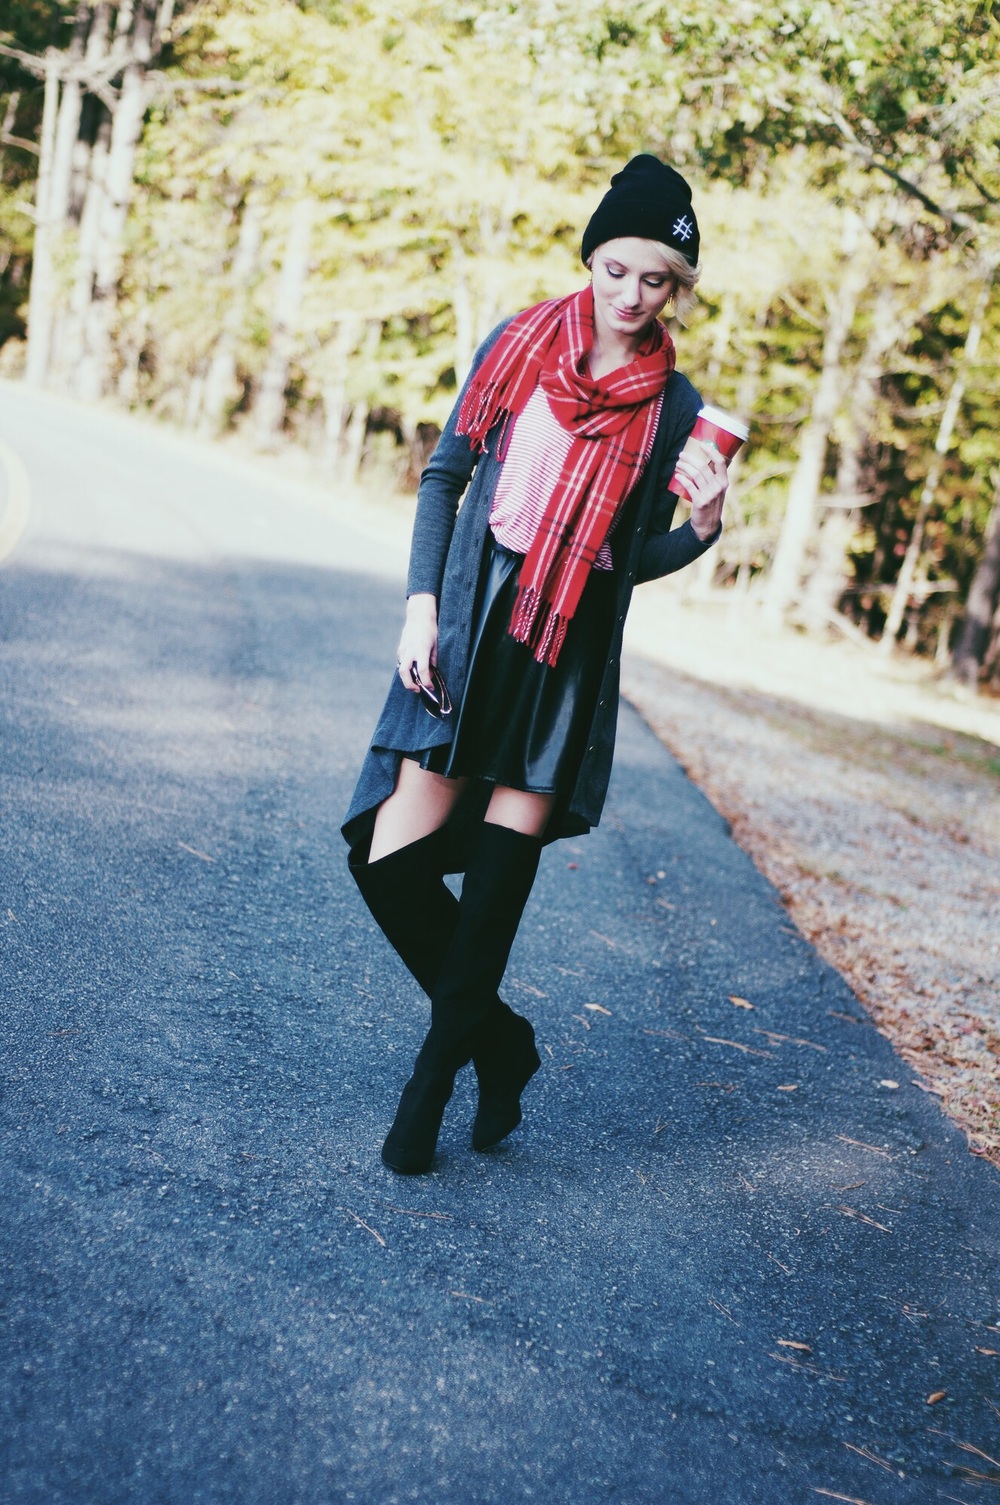 Over The Knee Boots Outfit Inspiration | Fall and winter fashion outfit inspiration by North Carolina fashion and lifestyle blogger Jessica Linn of Linn Style.